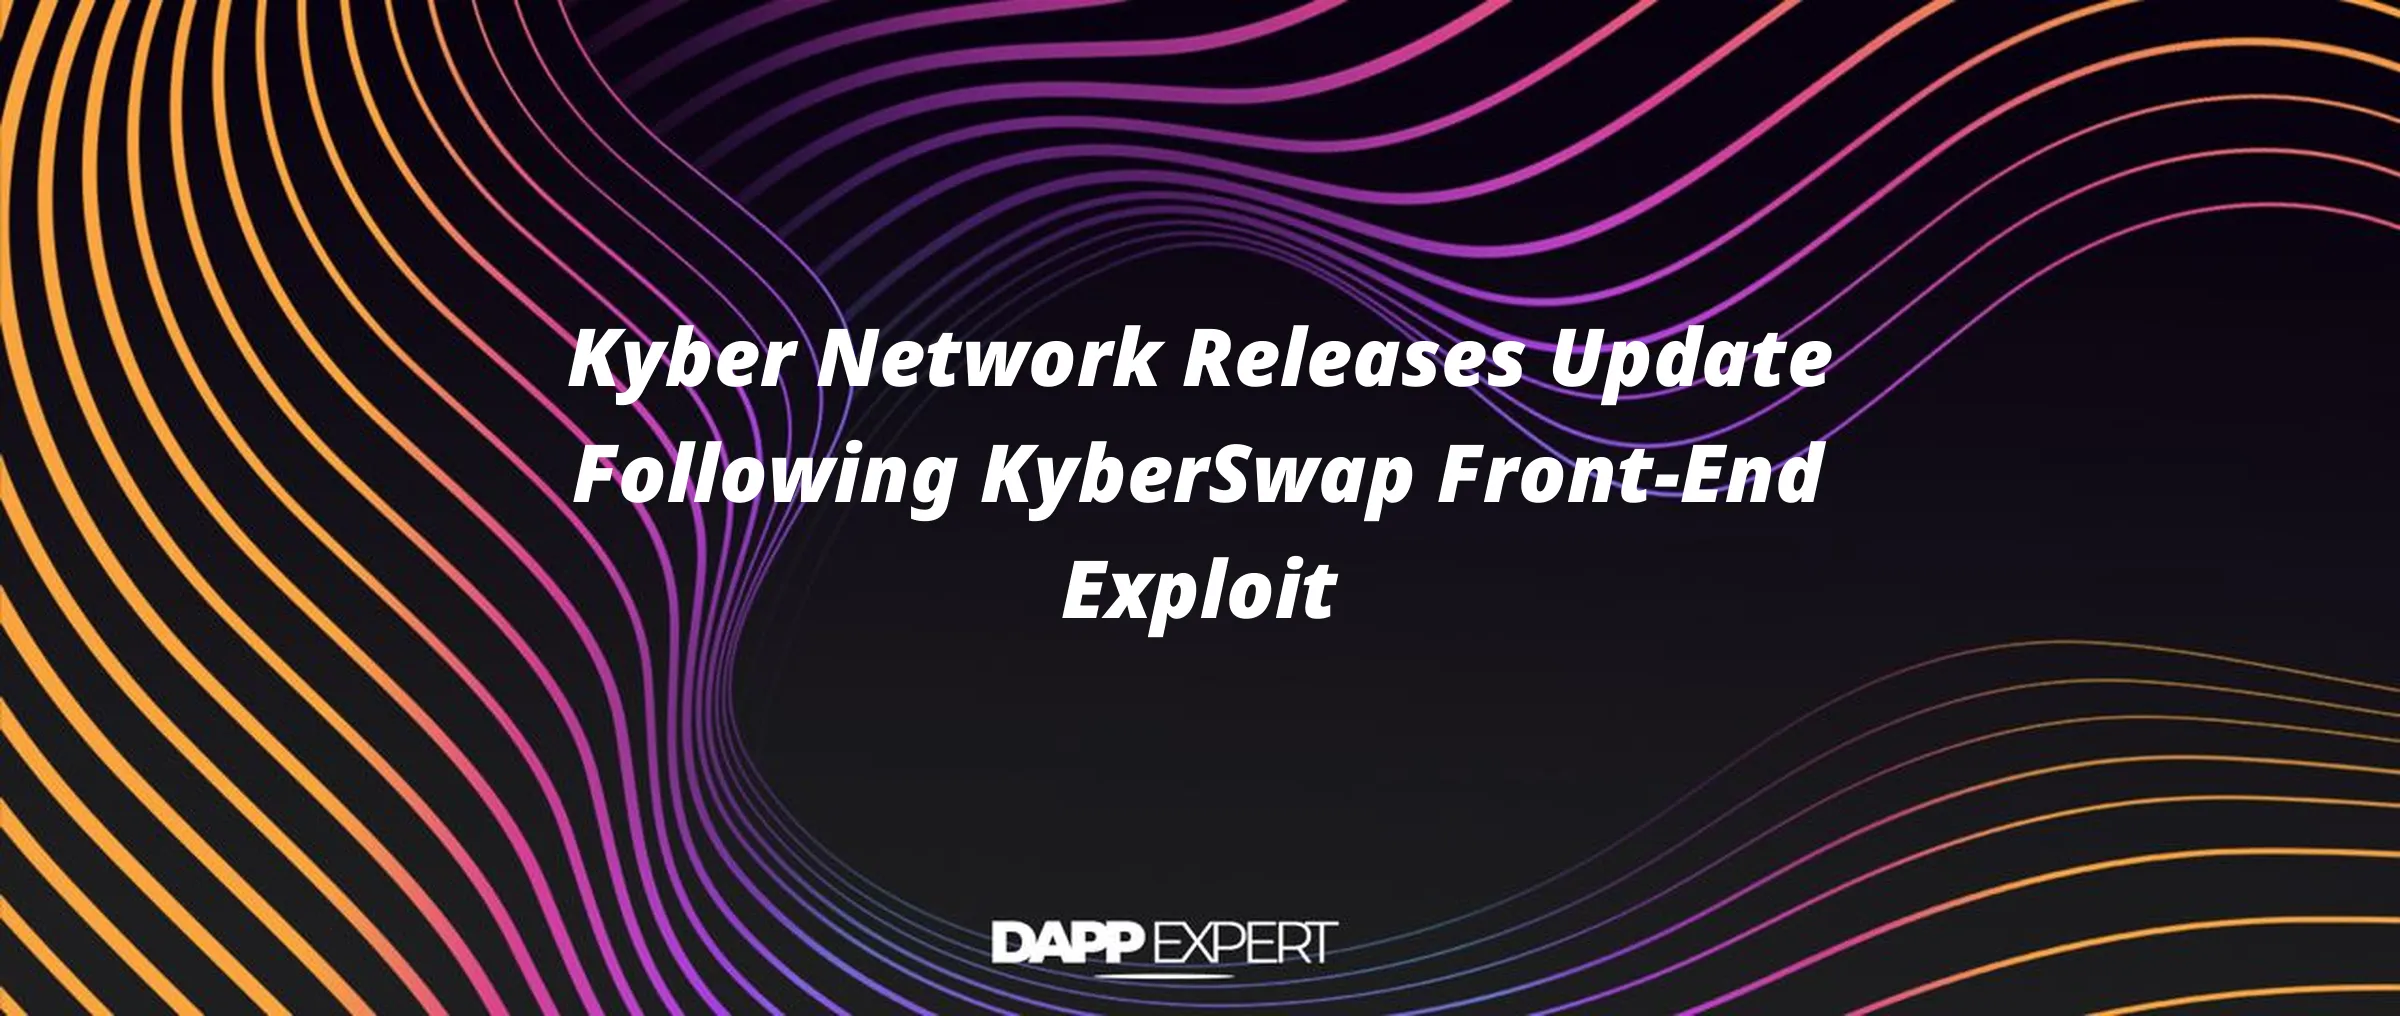 Kyber Network Releases Update Following KyberSwap Front-End Exploit